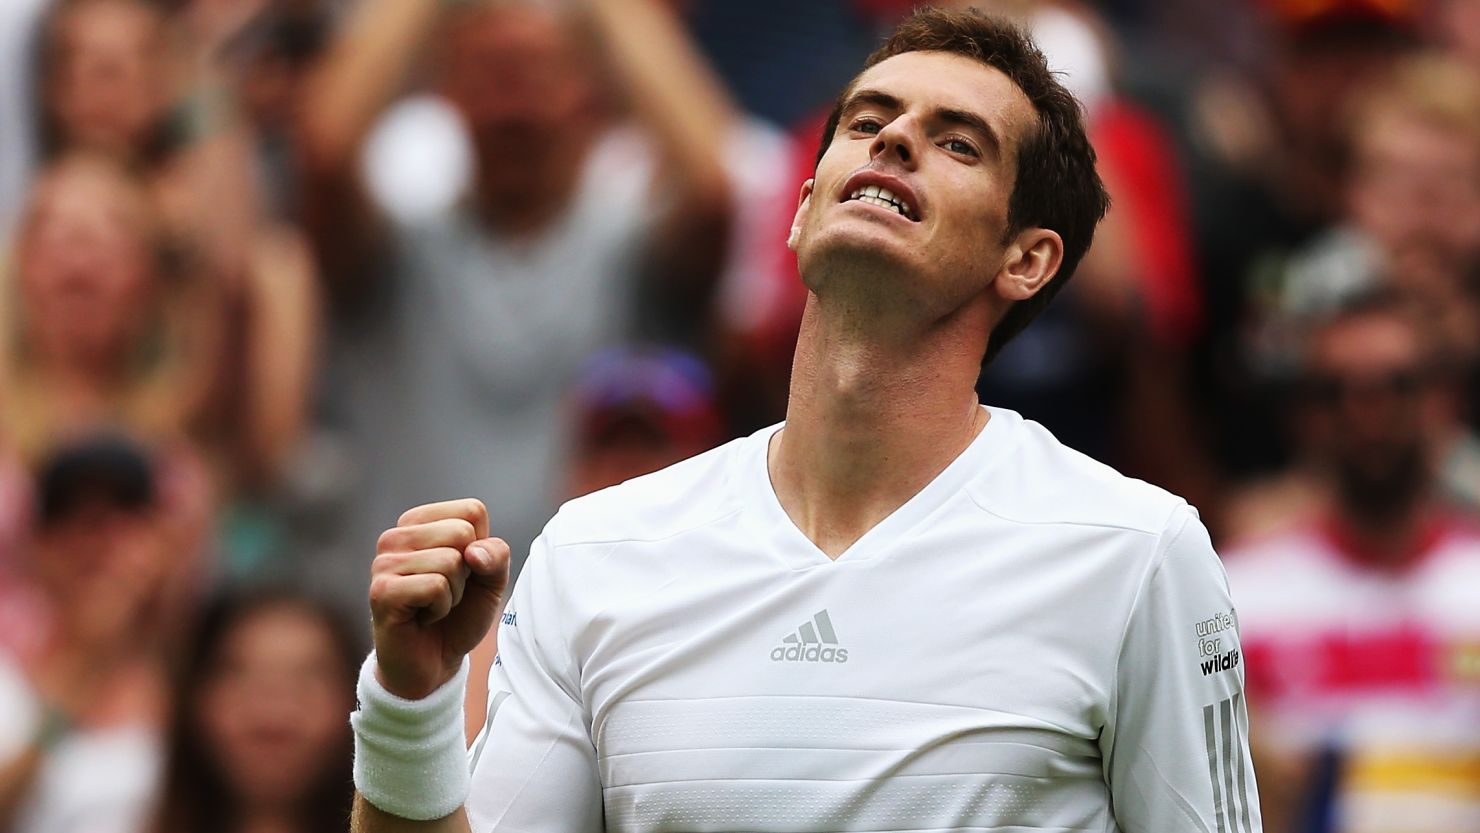 Andy Murray is bidding to win the third grand slam title of his career at the All England Club.